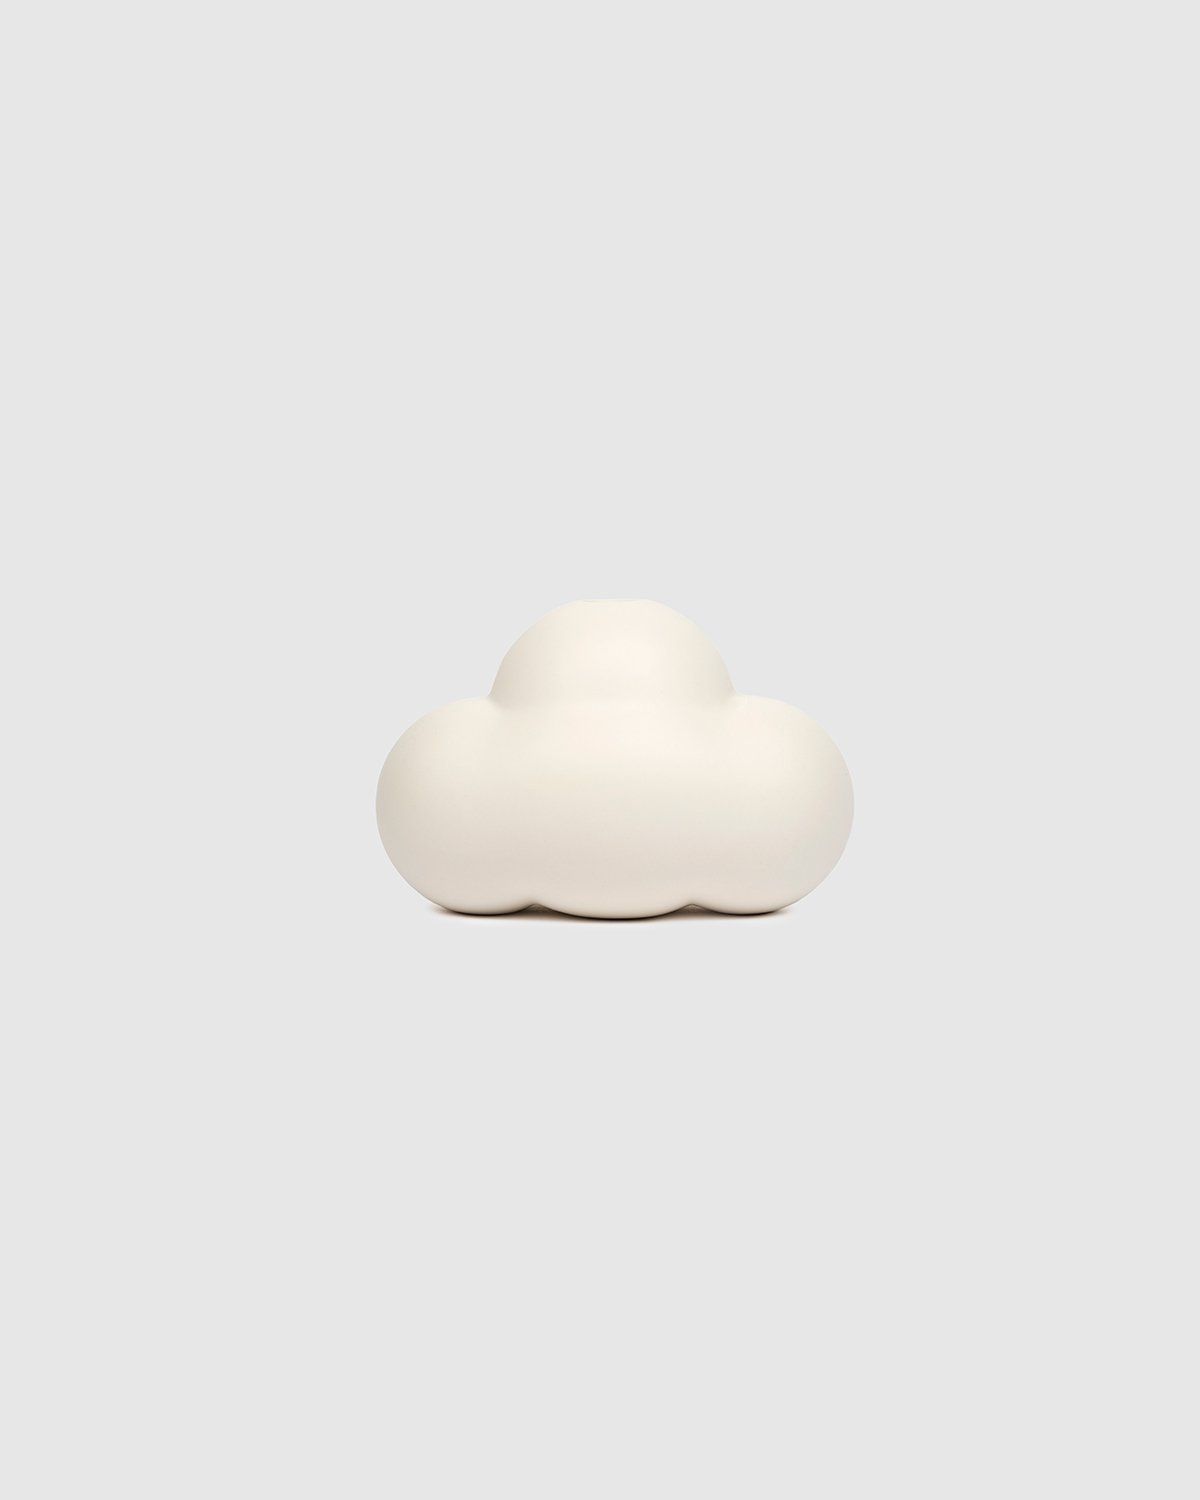 FriendsWithYou – Little Cloud Flower Vase by - Vases - White - Image 2